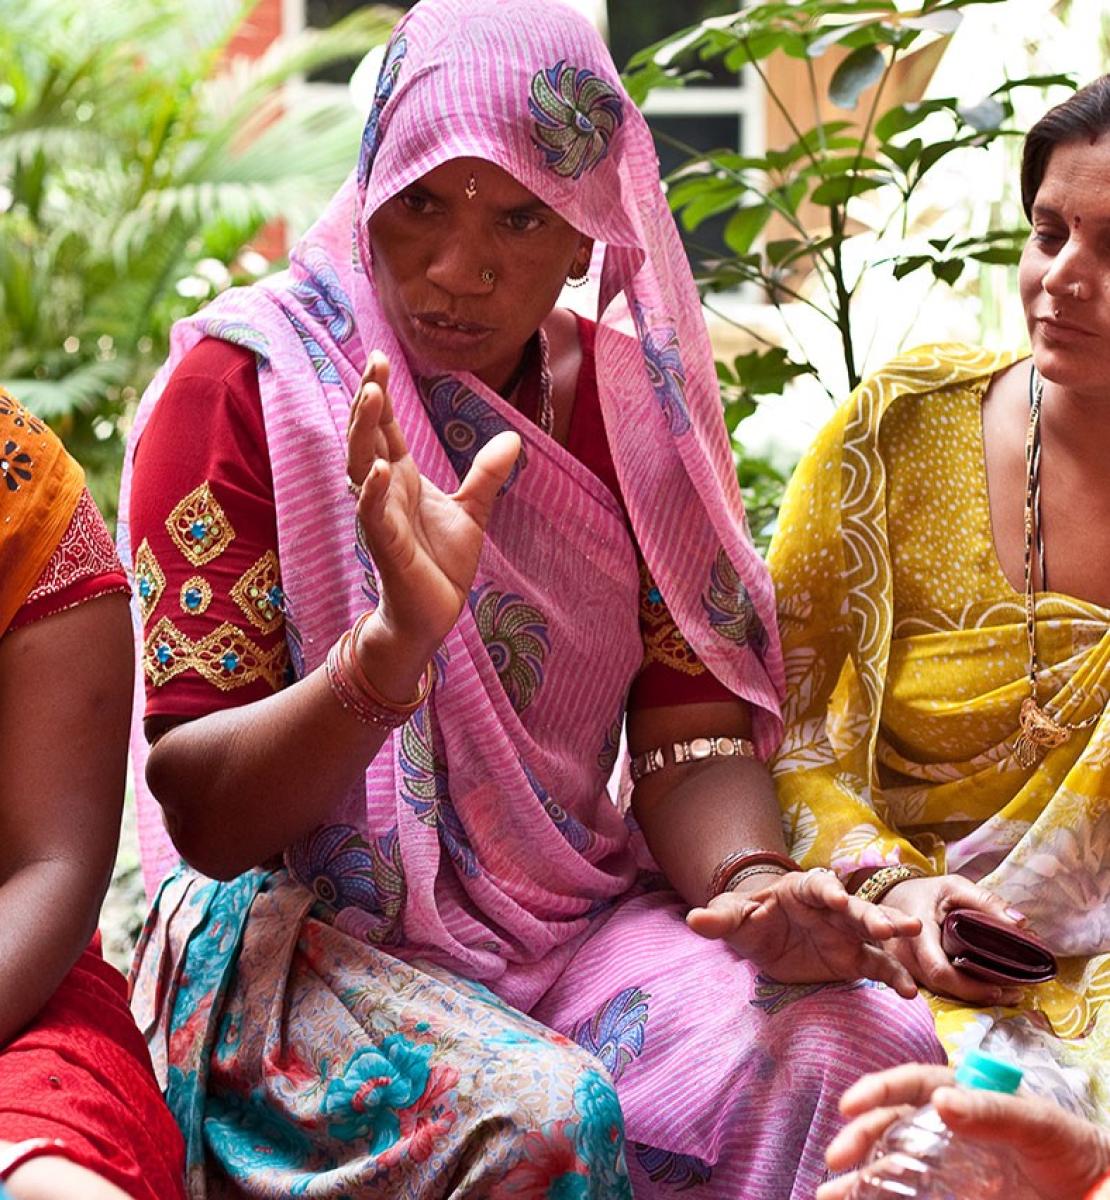 Photo shows a group of Indian women sitting together having a conversation.